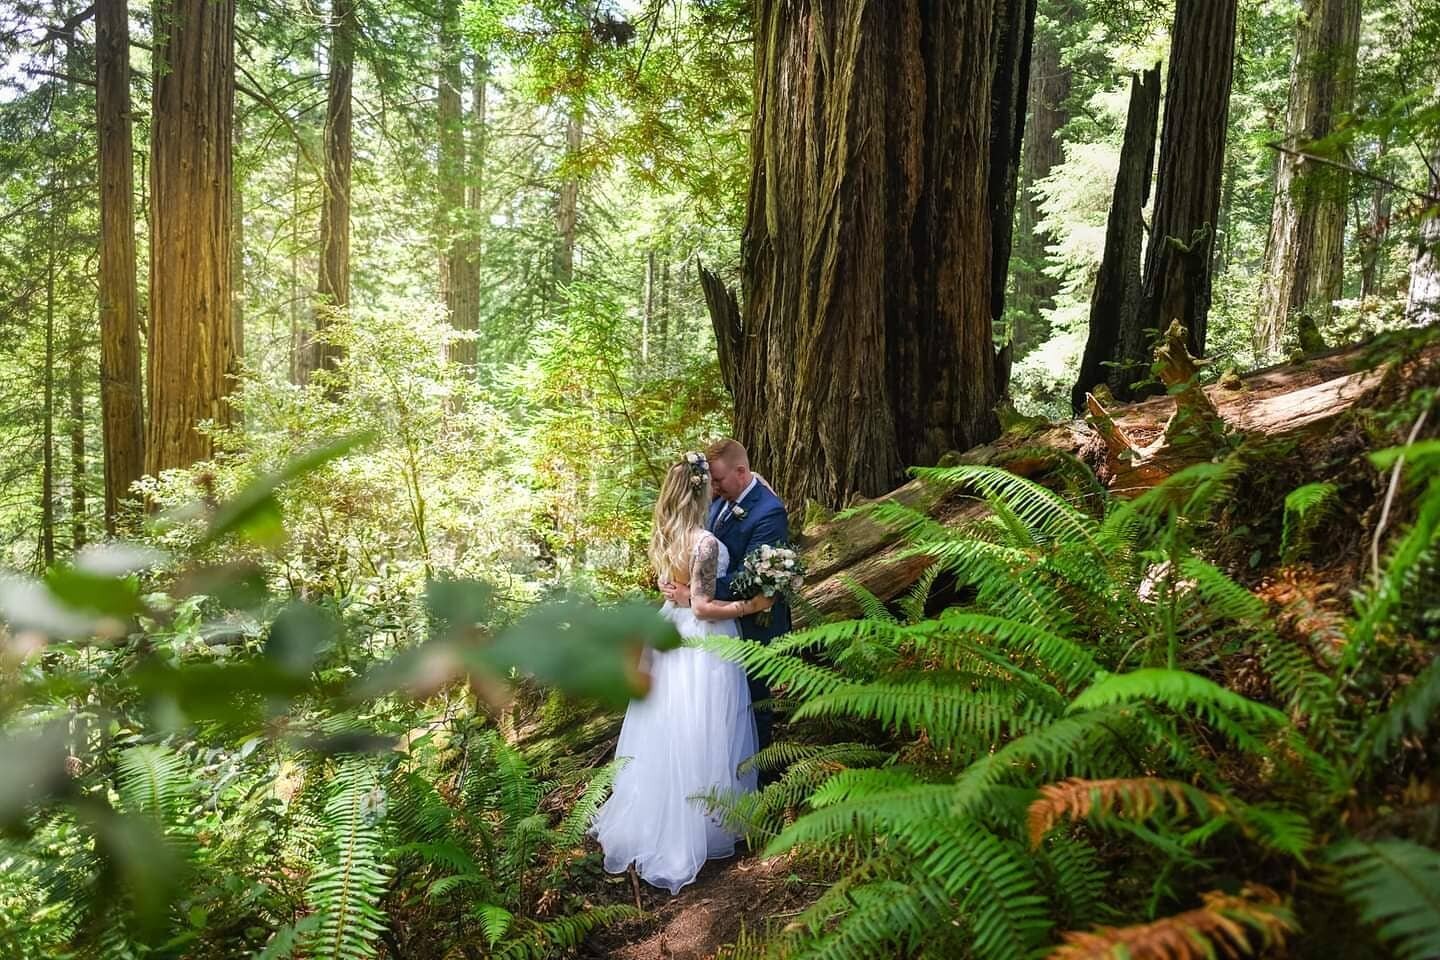 A sneak peek from yesterday's adventure elopement with Hannah and Cody : )